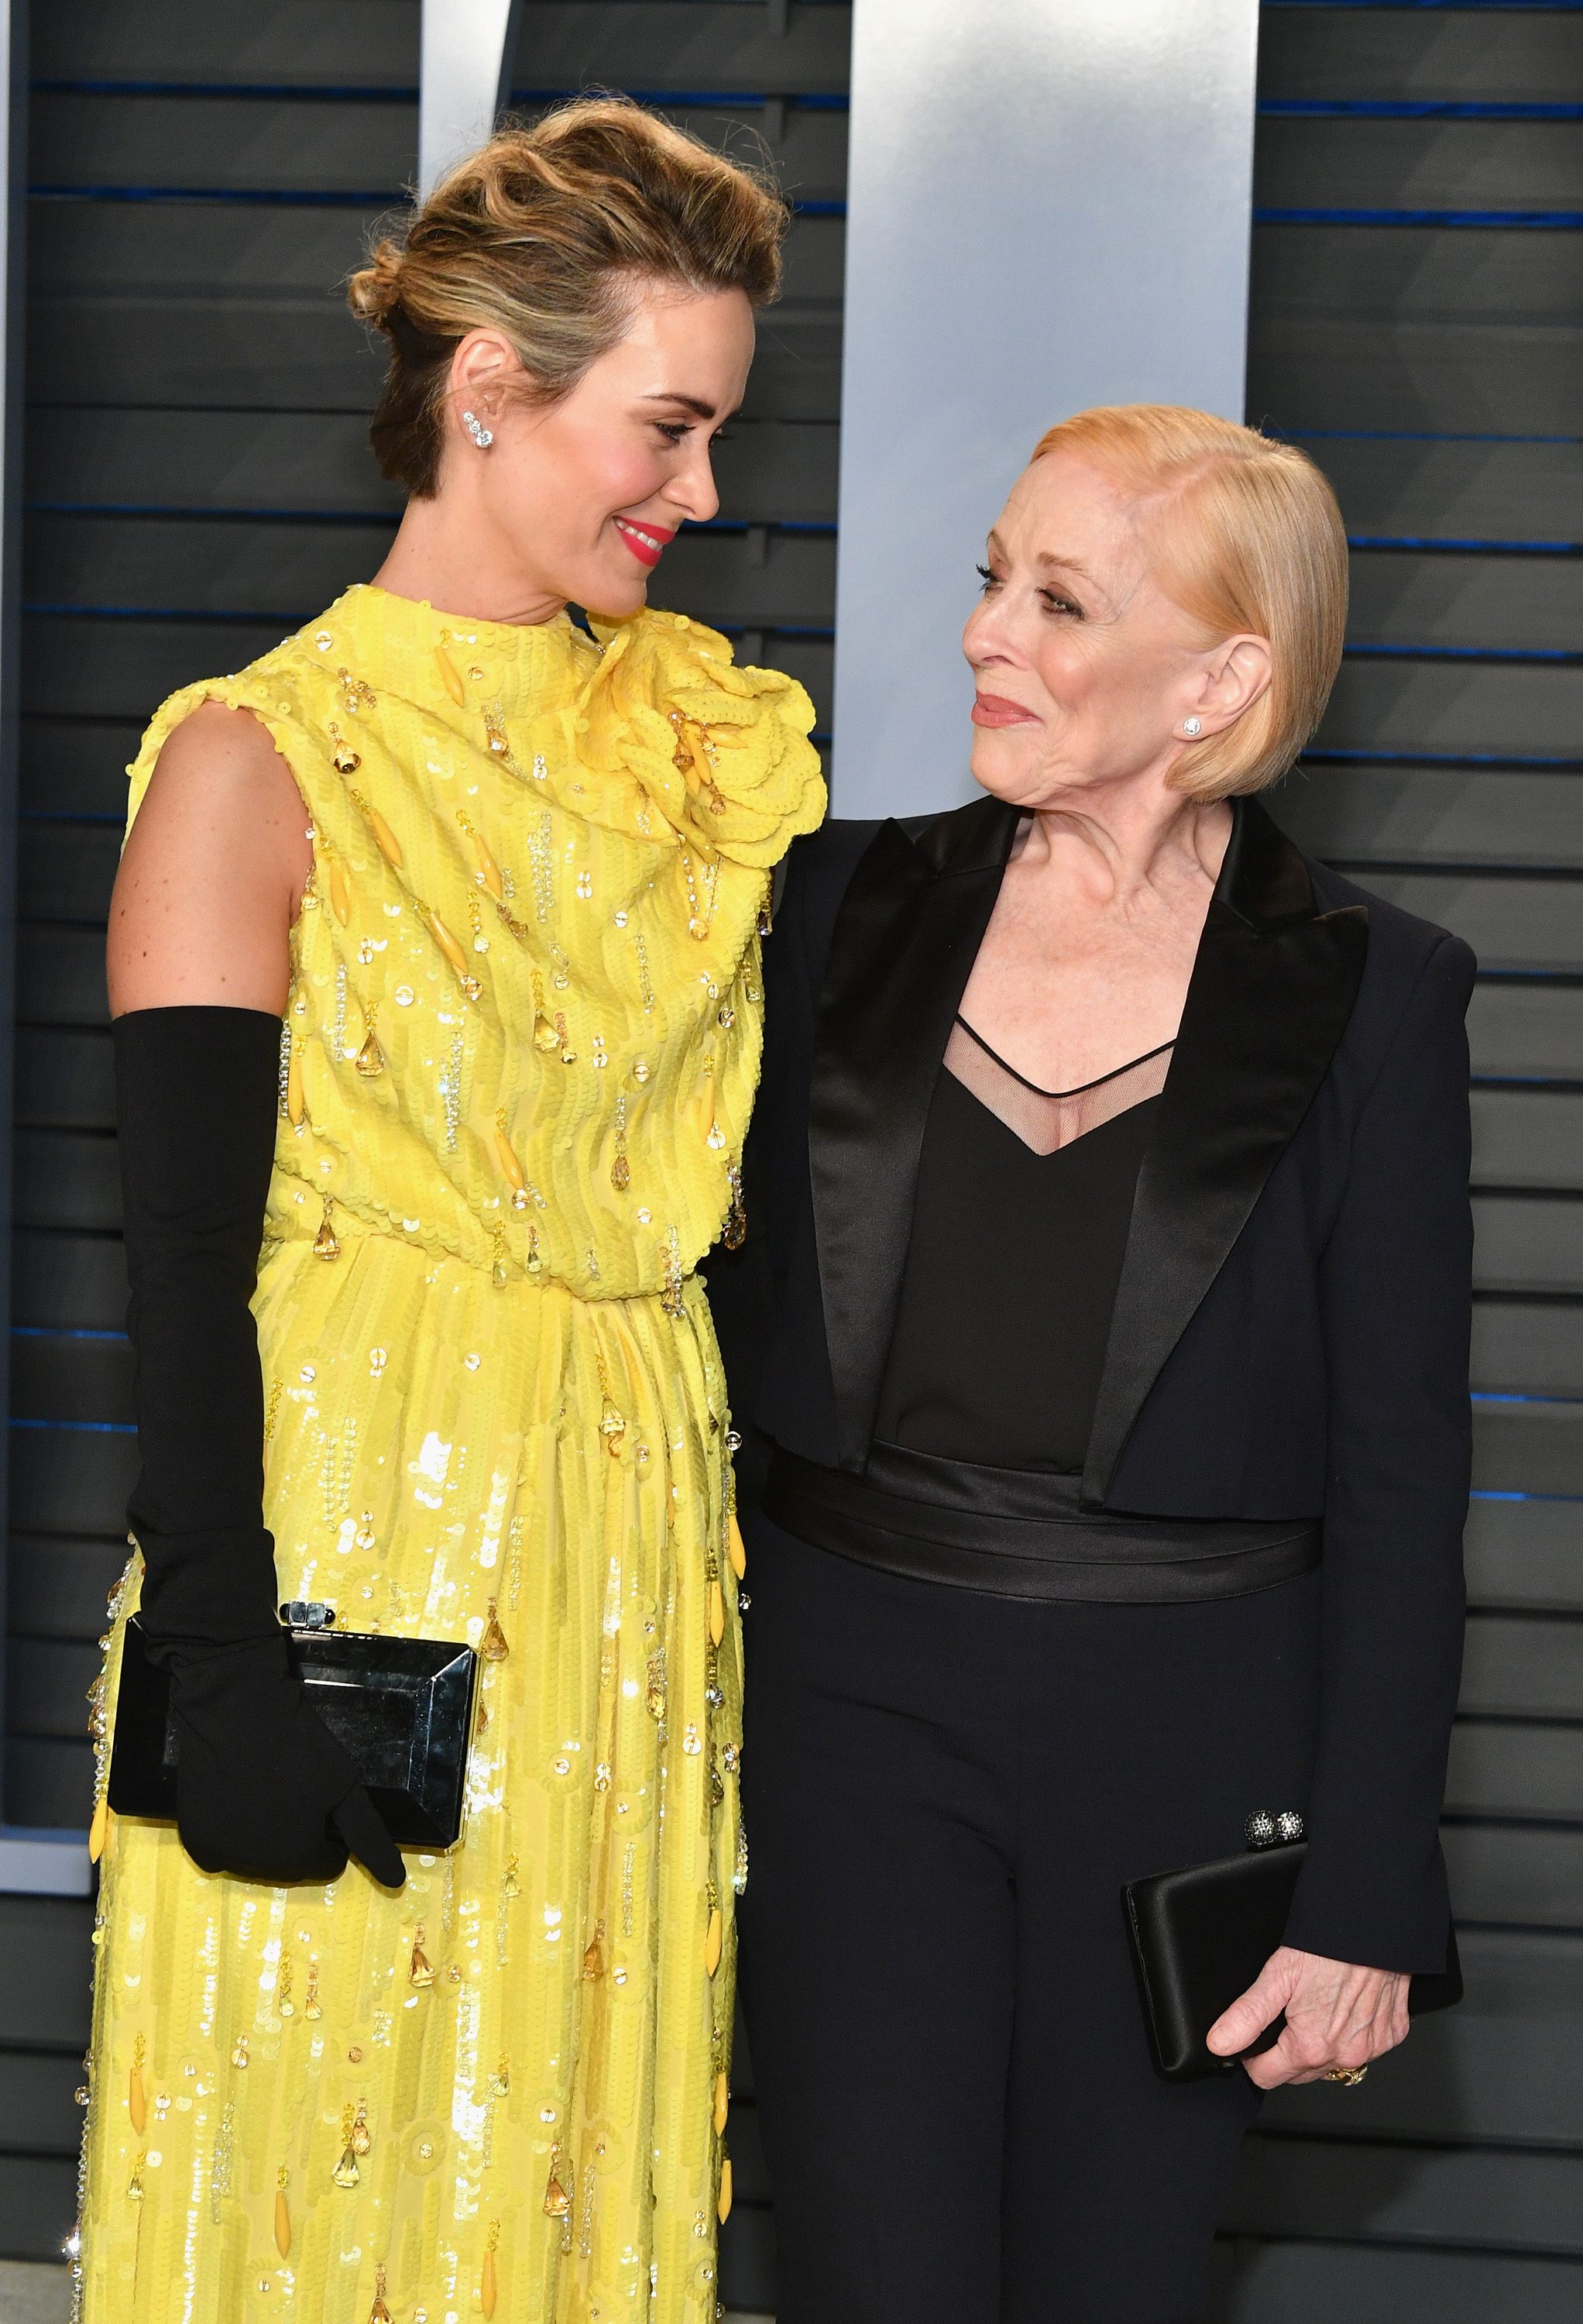 Sarah Paulson and Holland Taylor attend the 2018 Vanity Fair Oscar Party at Wallis Annenberg Center for the Performing Arts on March 4, 2018 in Beverly Hills, California | Source: Getty Images